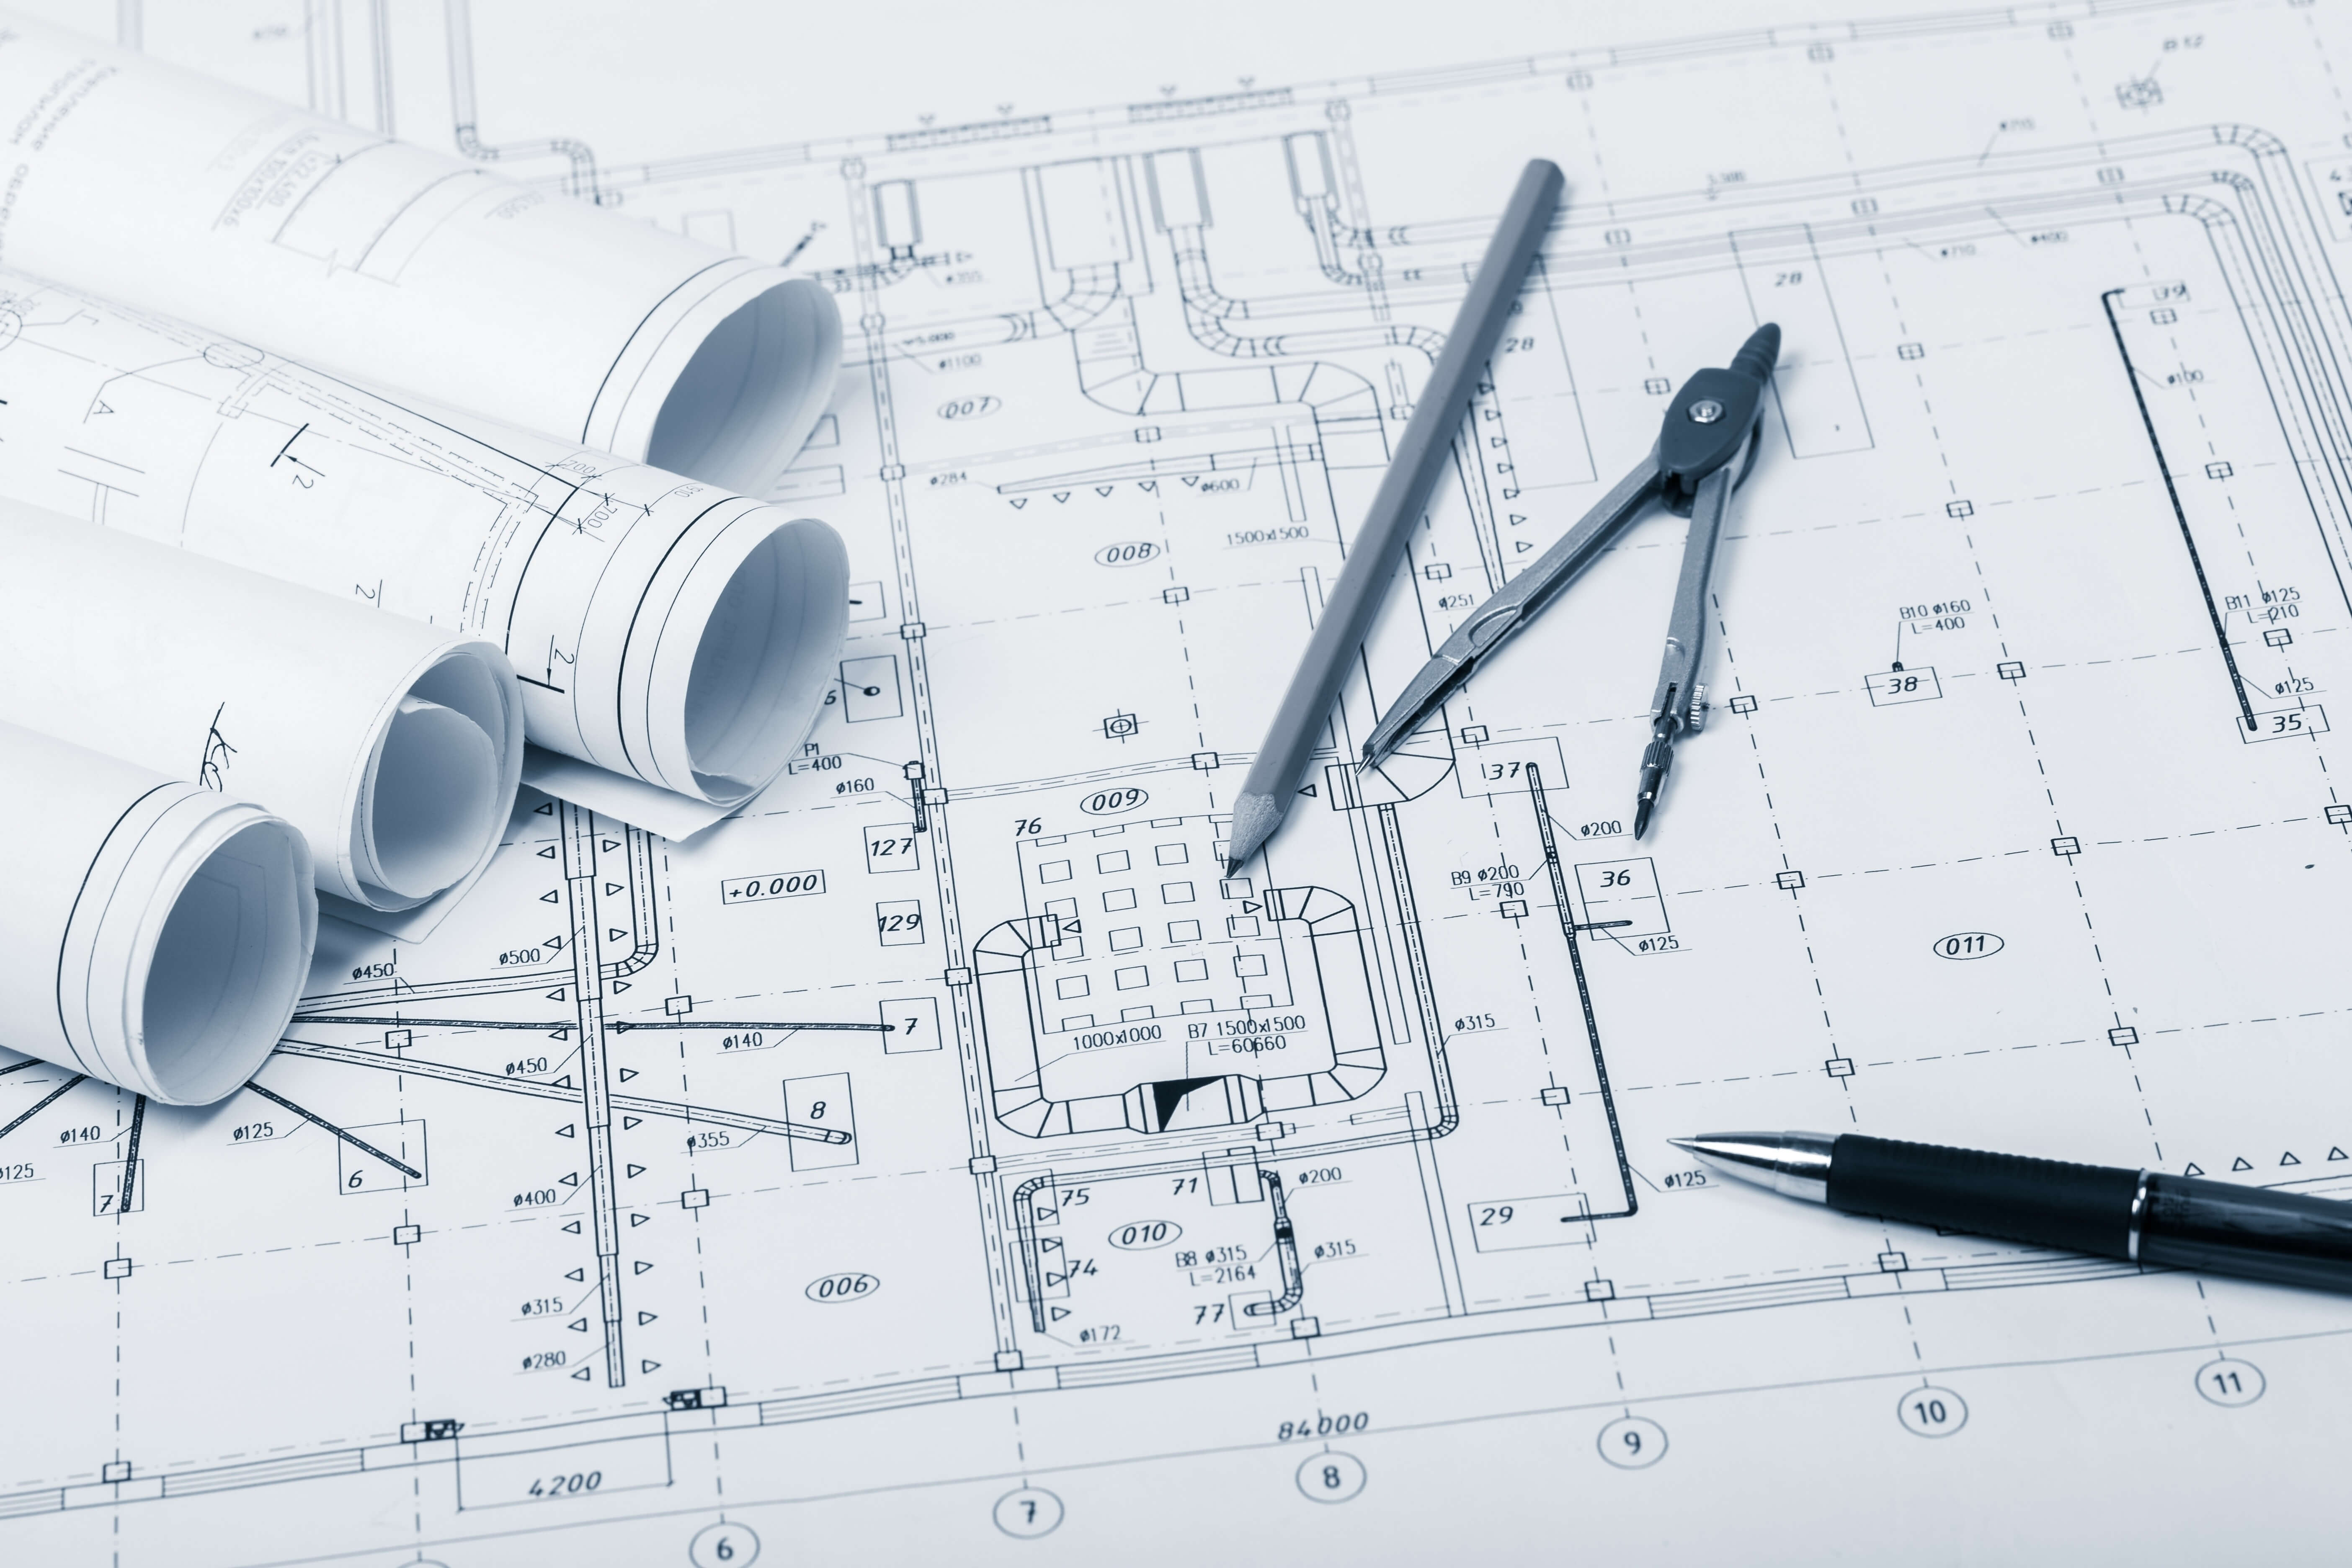 The Complete Architect Design Checklist for MEP Engineering Projects